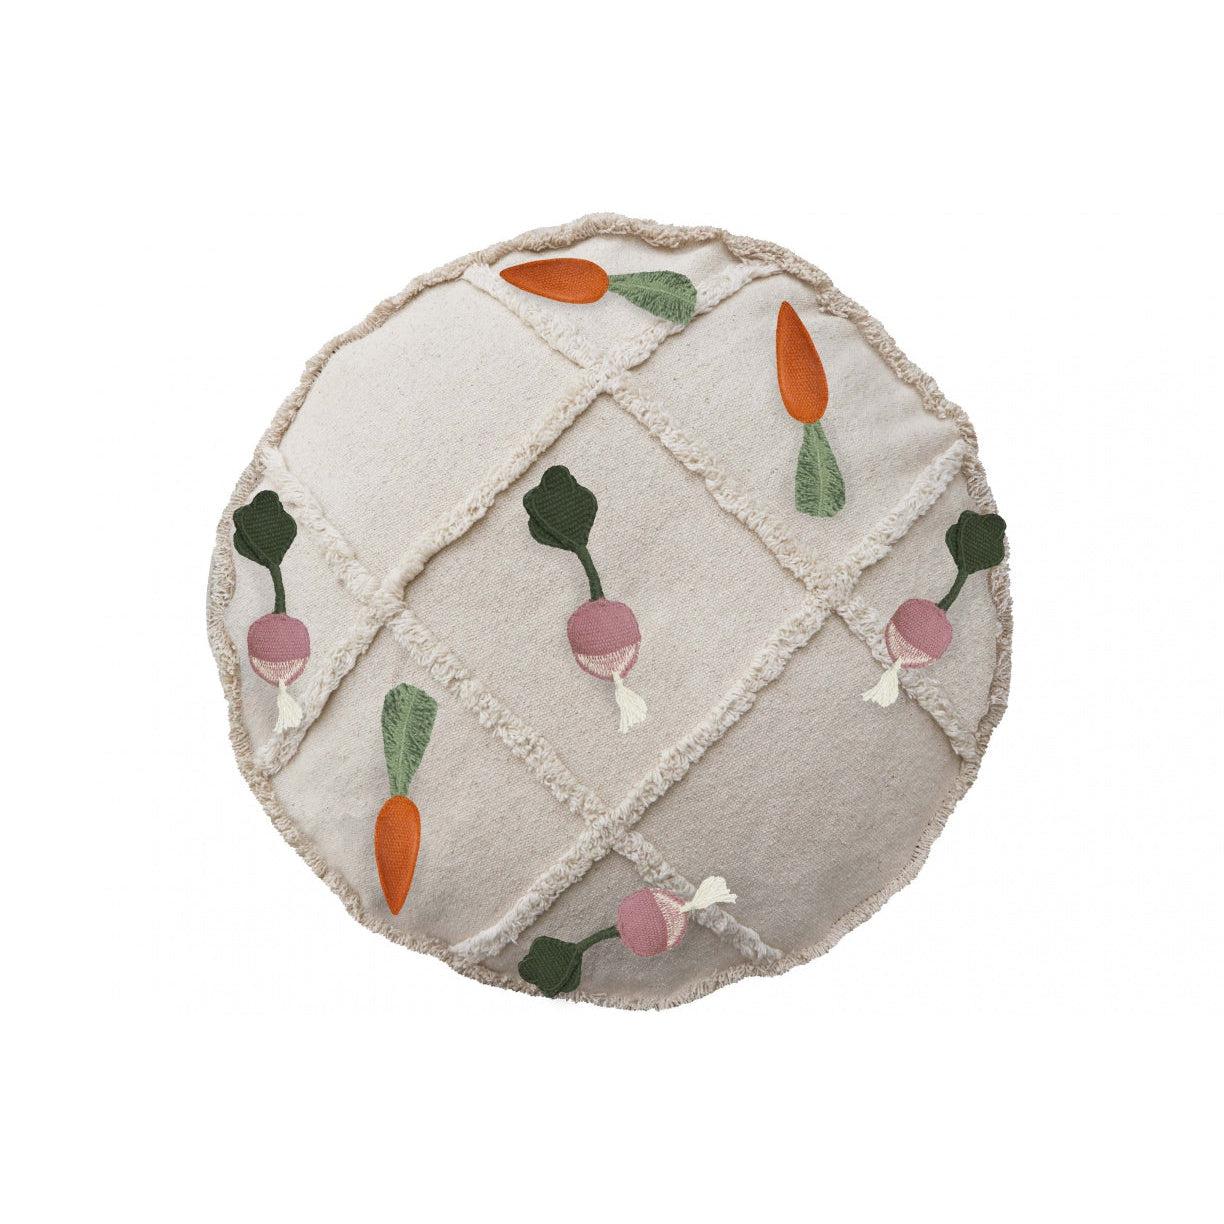 Rugs by Roo | Lorena Canals Oli & Carol Tic-Tac-Toe Pouf-P-TICTAC